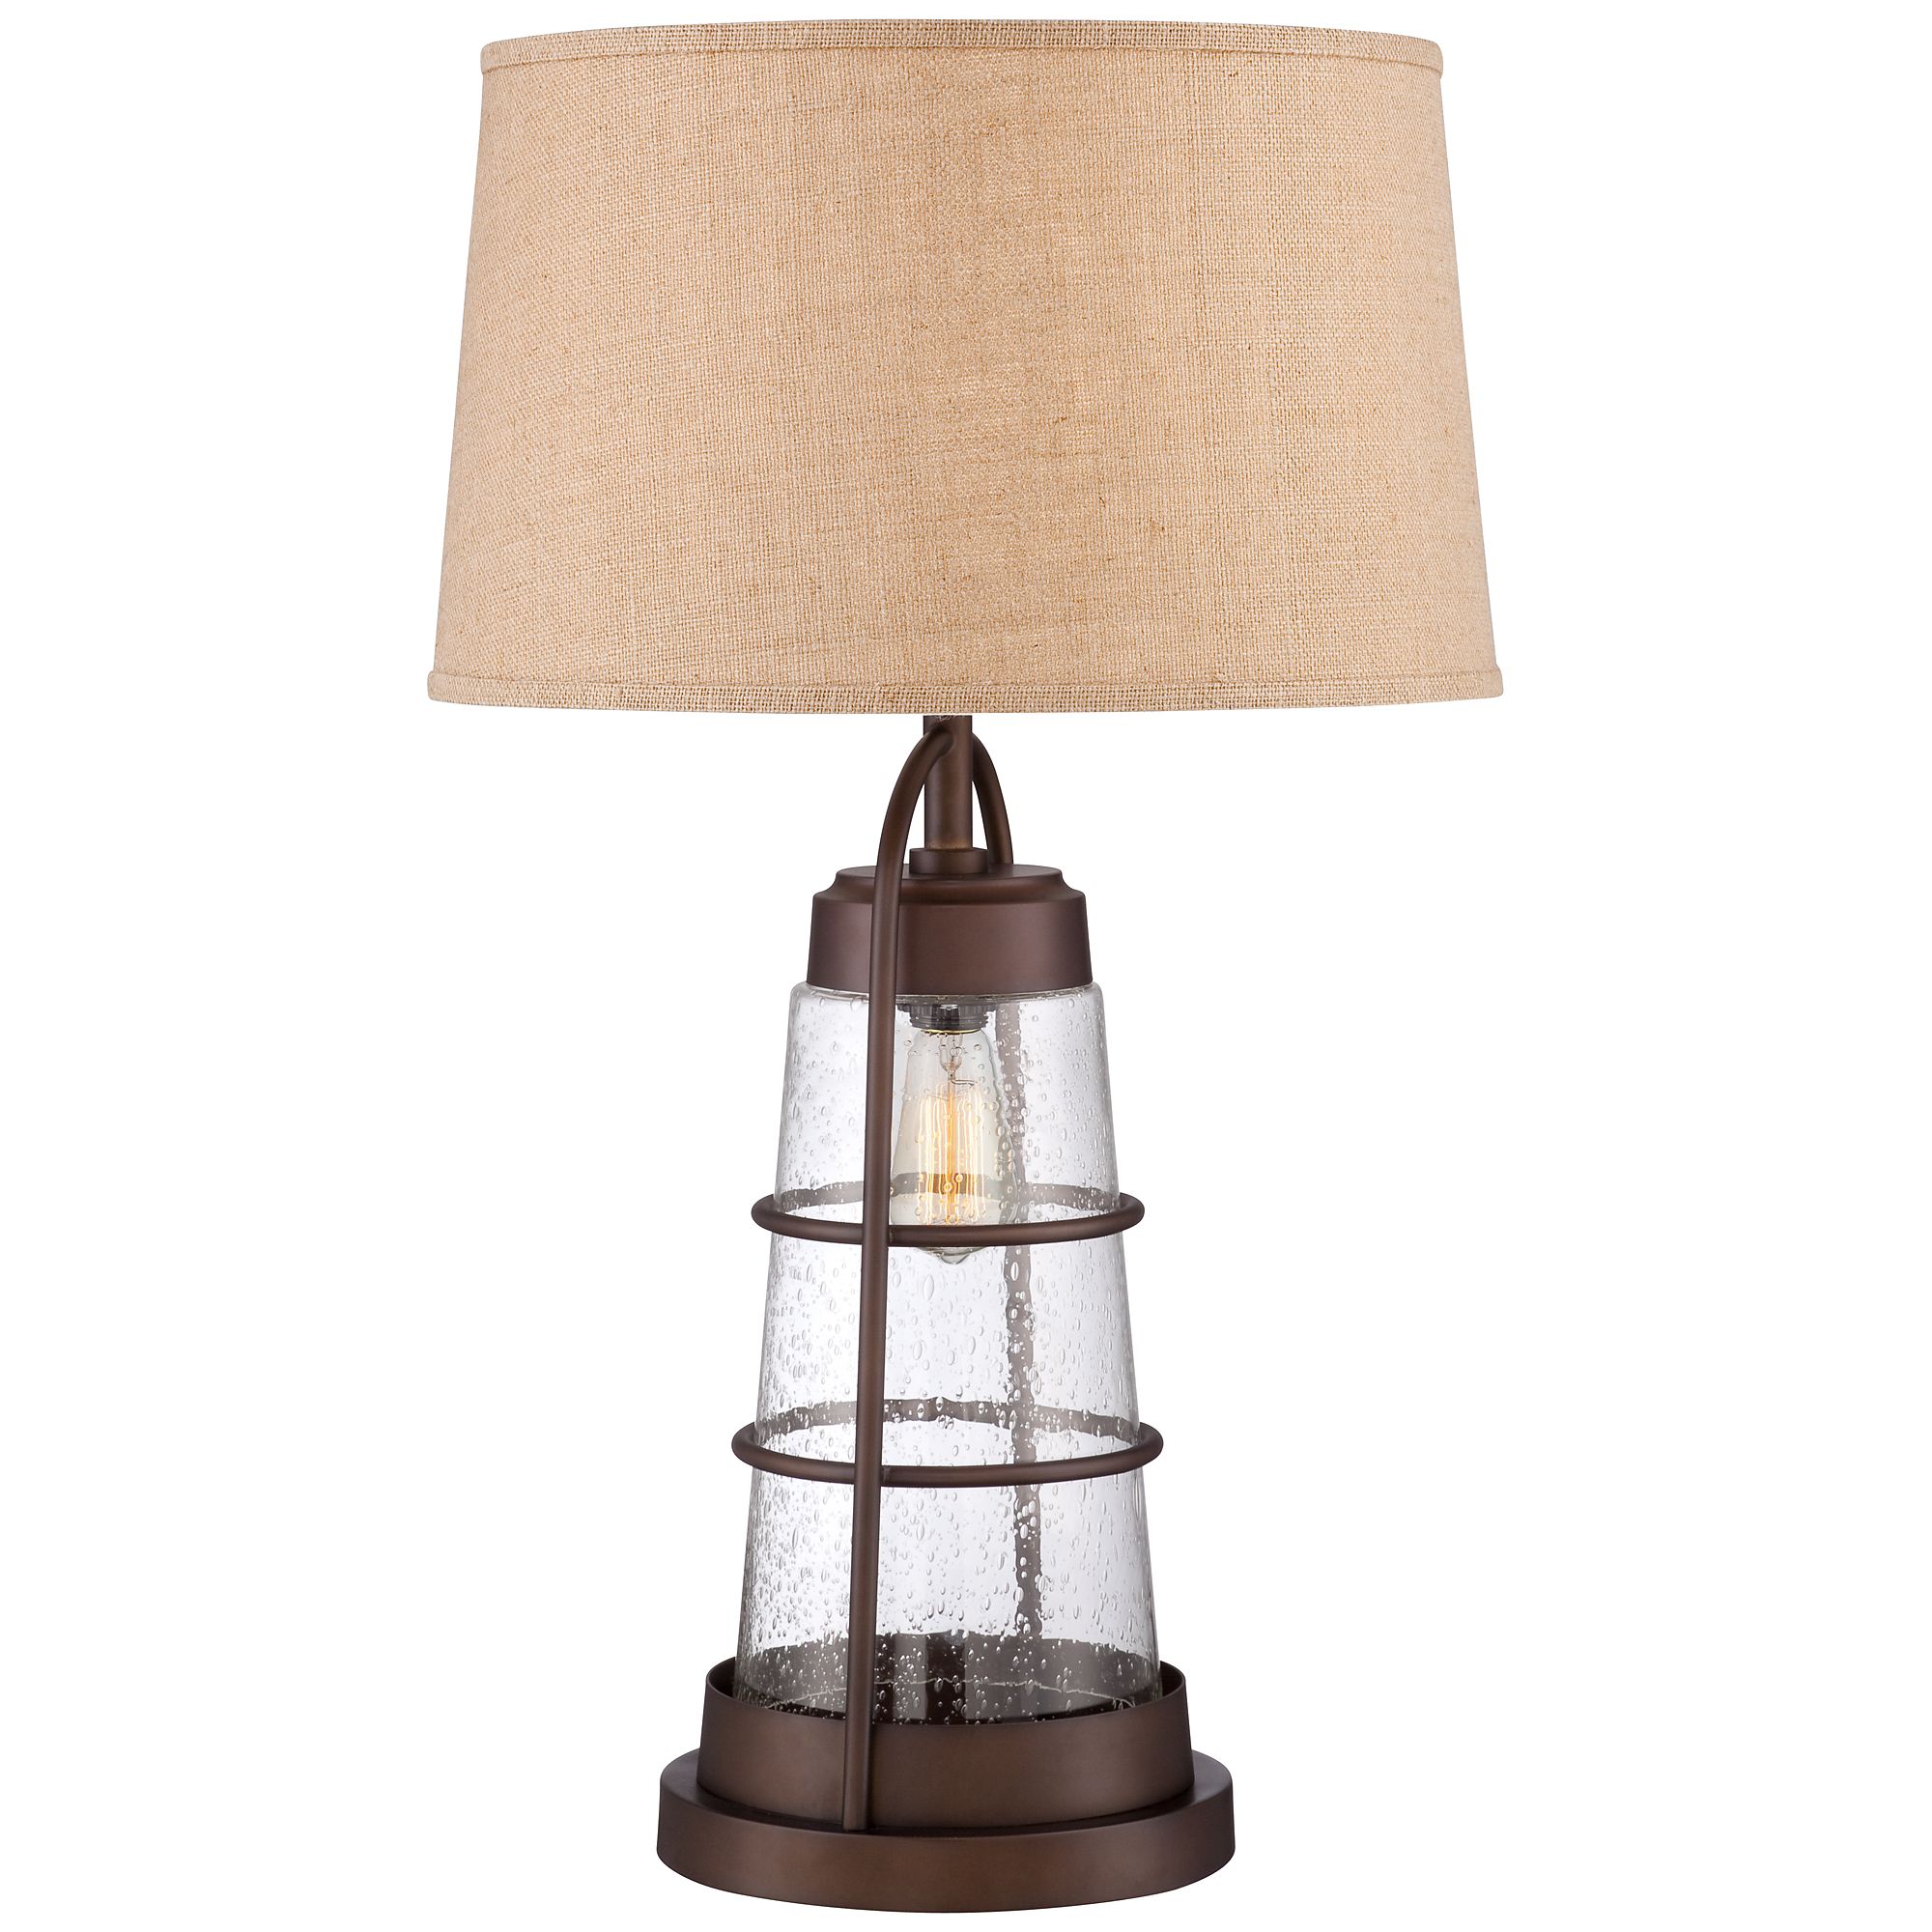 Franklin Iron Works Rustic Farmhouse Table Lamp 31